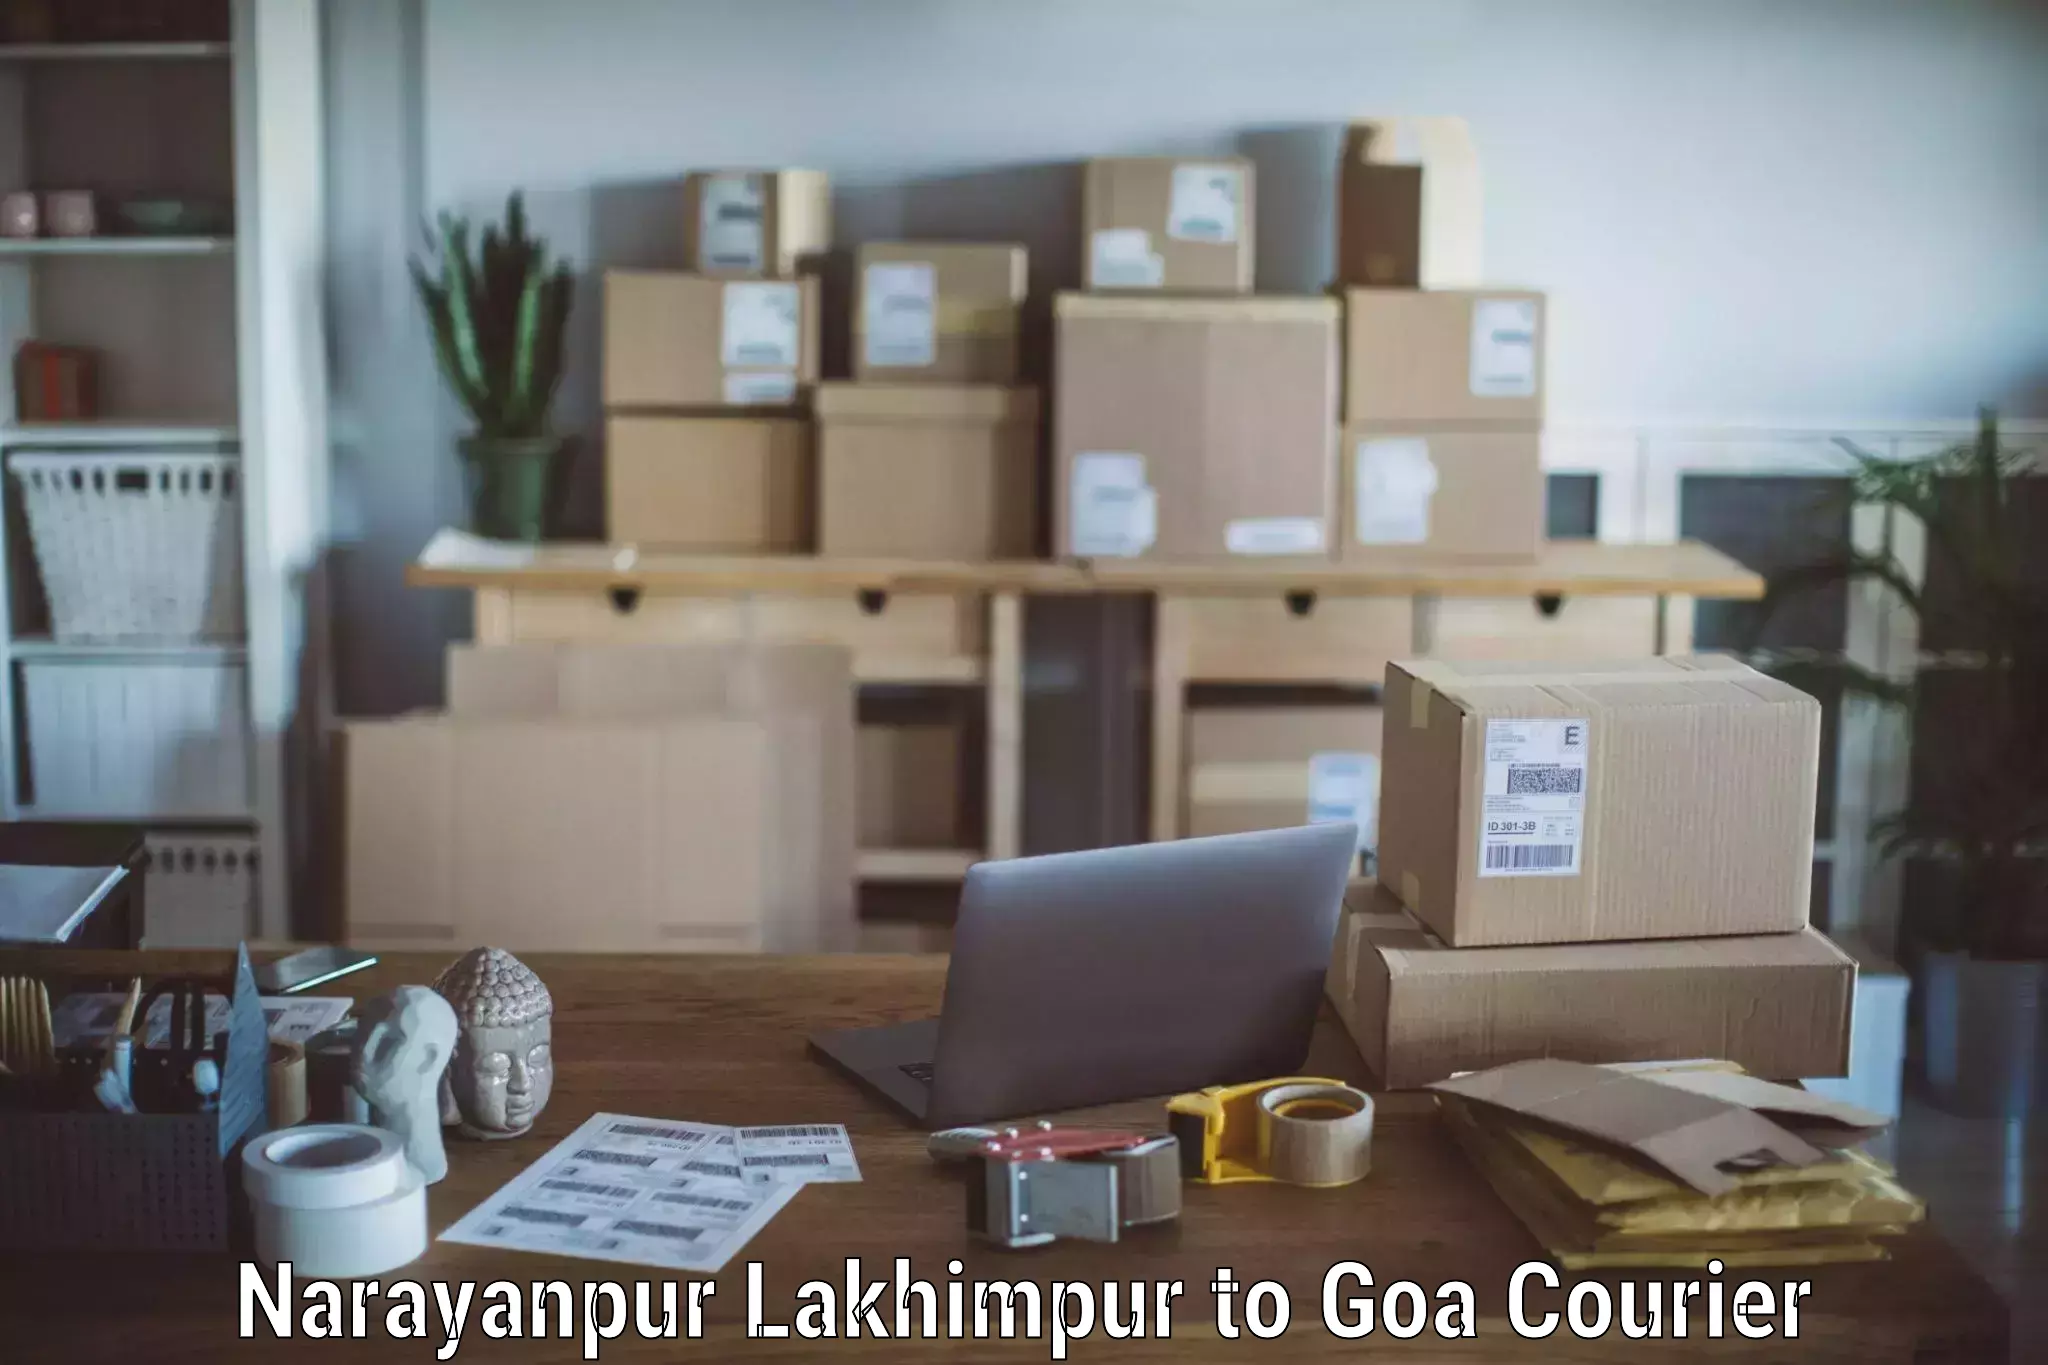 Hassle-free relocation Narayanpur Lakhimpur to South Goa